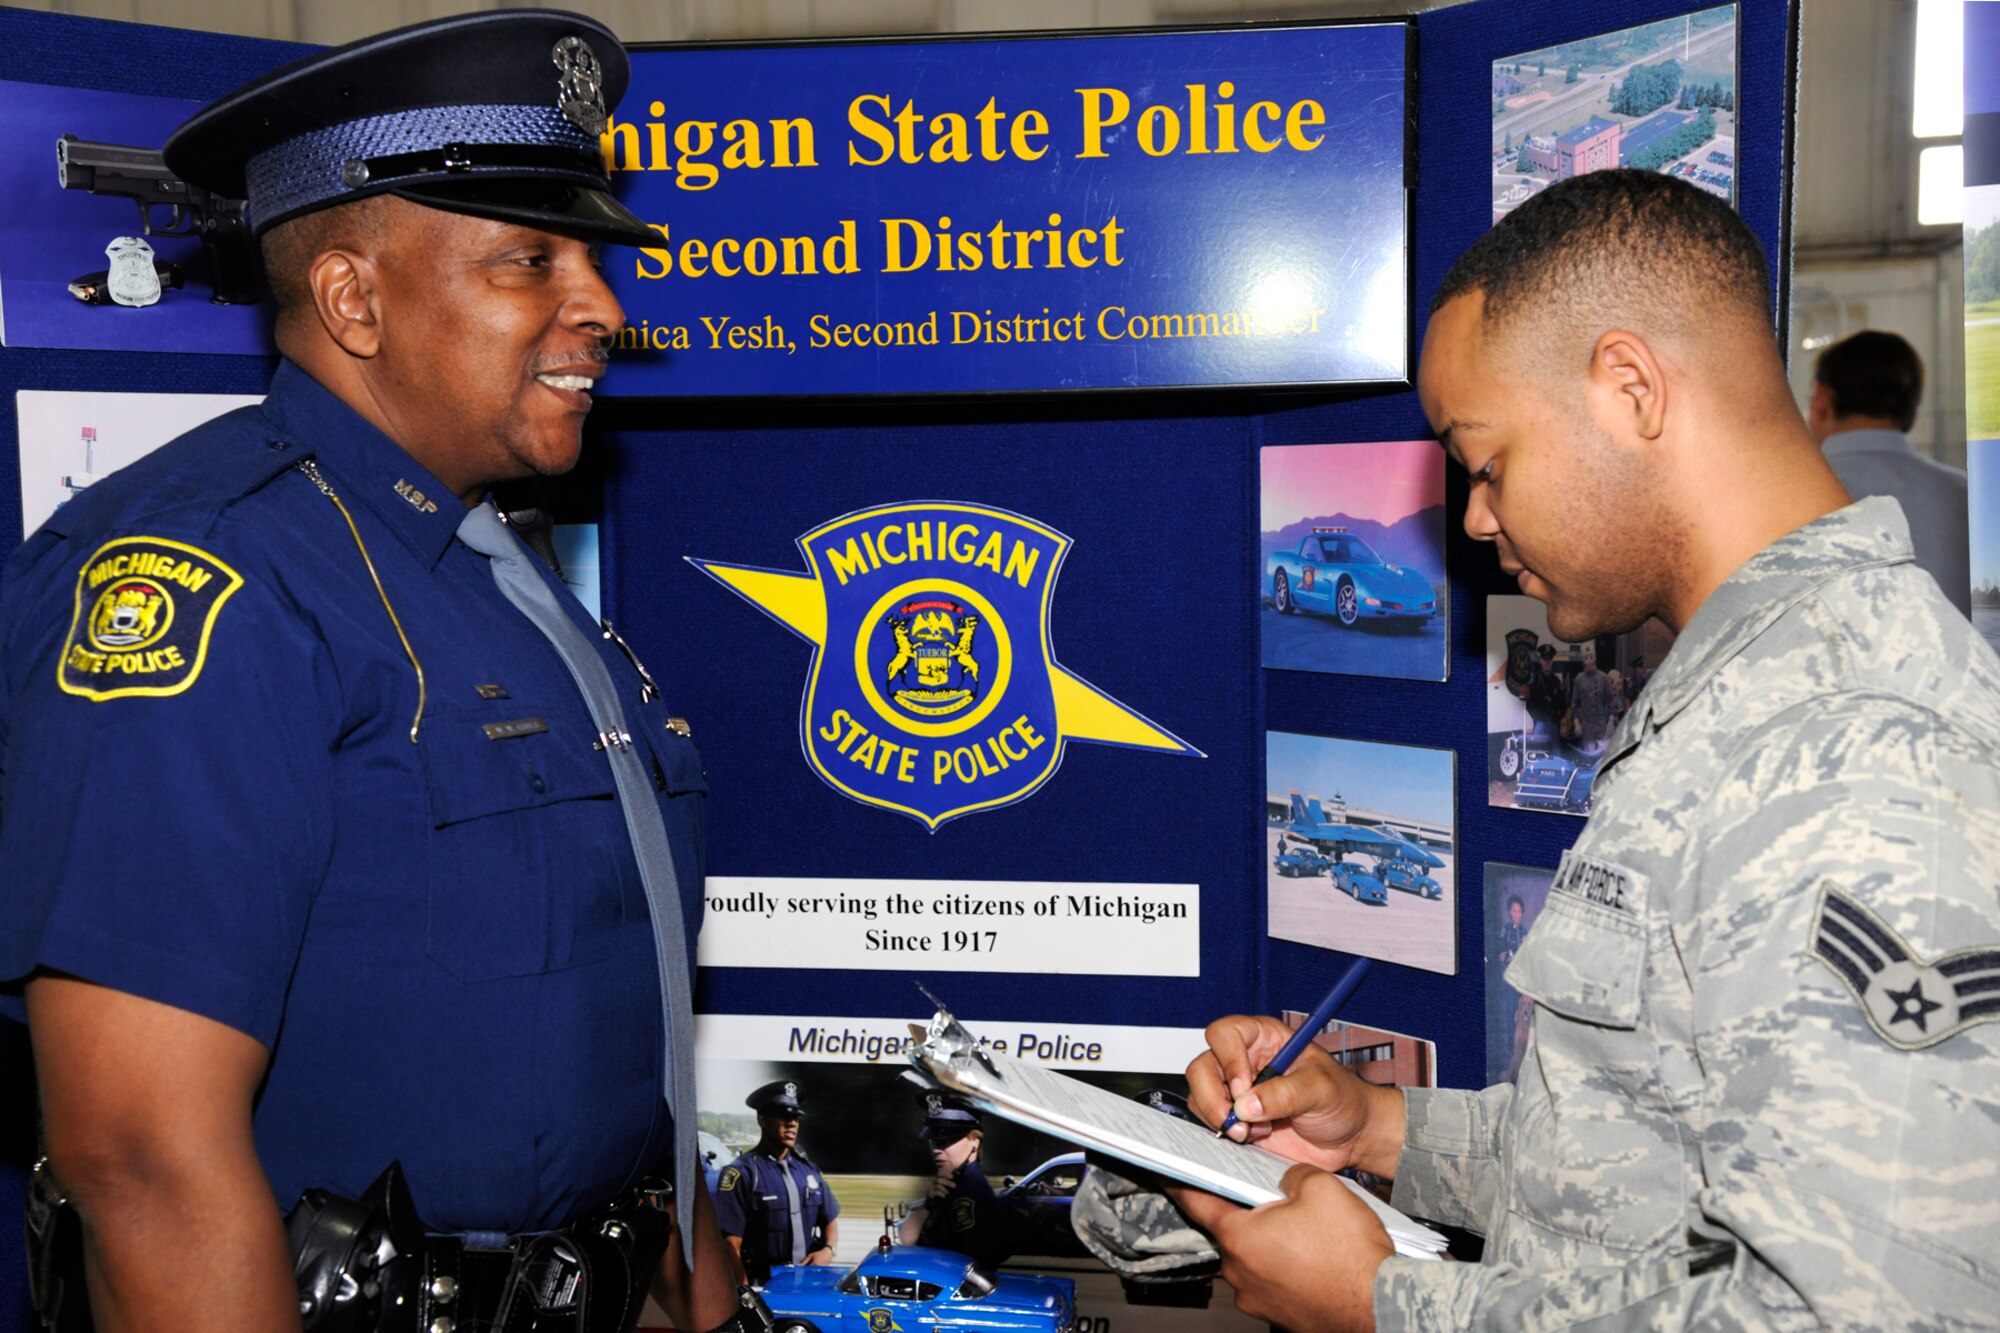 Senior Airman Alfonzsa Jackson of the 127th Maintenance Squadron speaks with Trooper Walter Crider of the Michigan State Police during the Hiring Our Heroes job fair at Selfridge Air National Guard Base, Mich., May. 18, 2013. Jackson, a six year member of the Air National Guard and recently a member of the 127th MXS Aerospace Ground Equipment crew, attended the job fair to explore possible career opportunities in law enforcement. More than 300 were in attendance visiting with representatives of more than 50 employers. (U.S. Air National Guard photo by TSgt. David Kujawa)